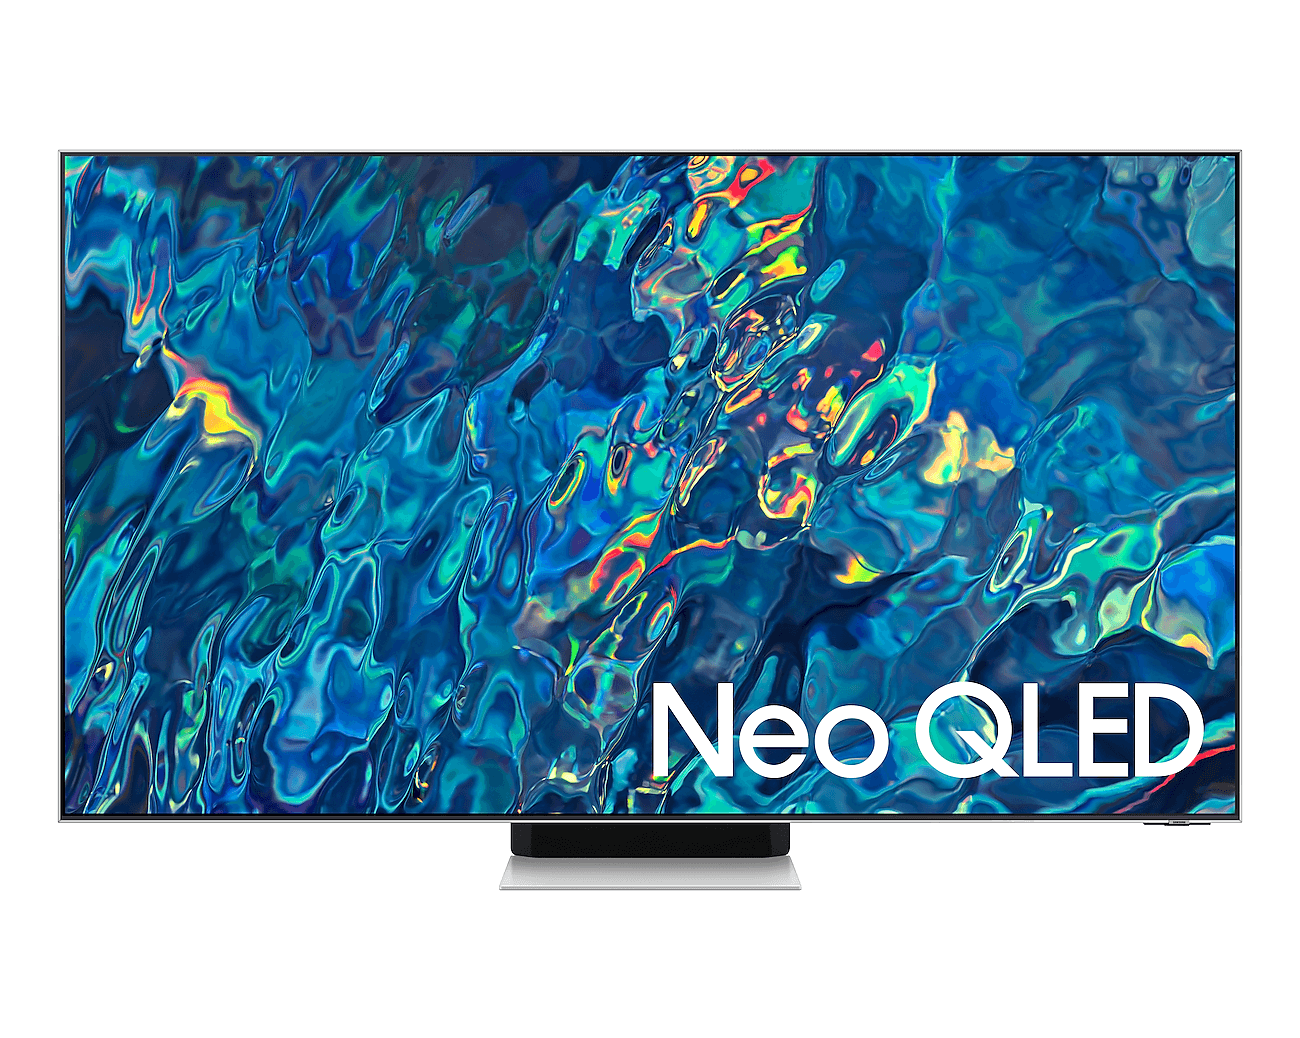 75 inch Samsung neo qled 4k tv, smart tv, qn95b, 2022 model (QA75QN95BAKXXS) price and features